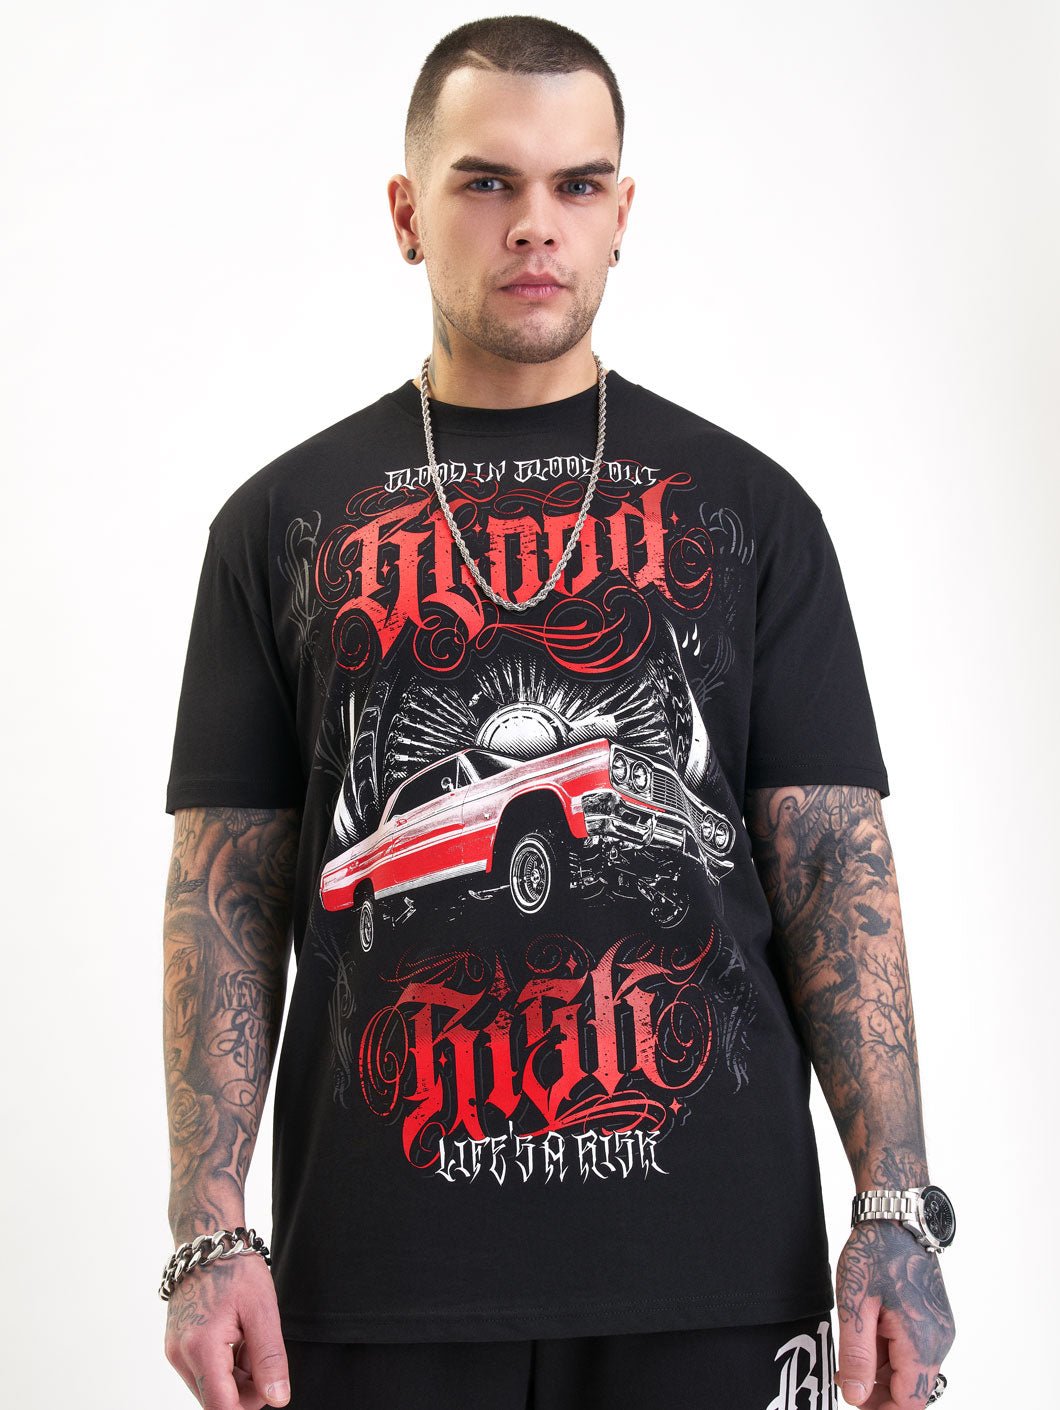 Blood In Blood Out Tavos T-Shirt - 10